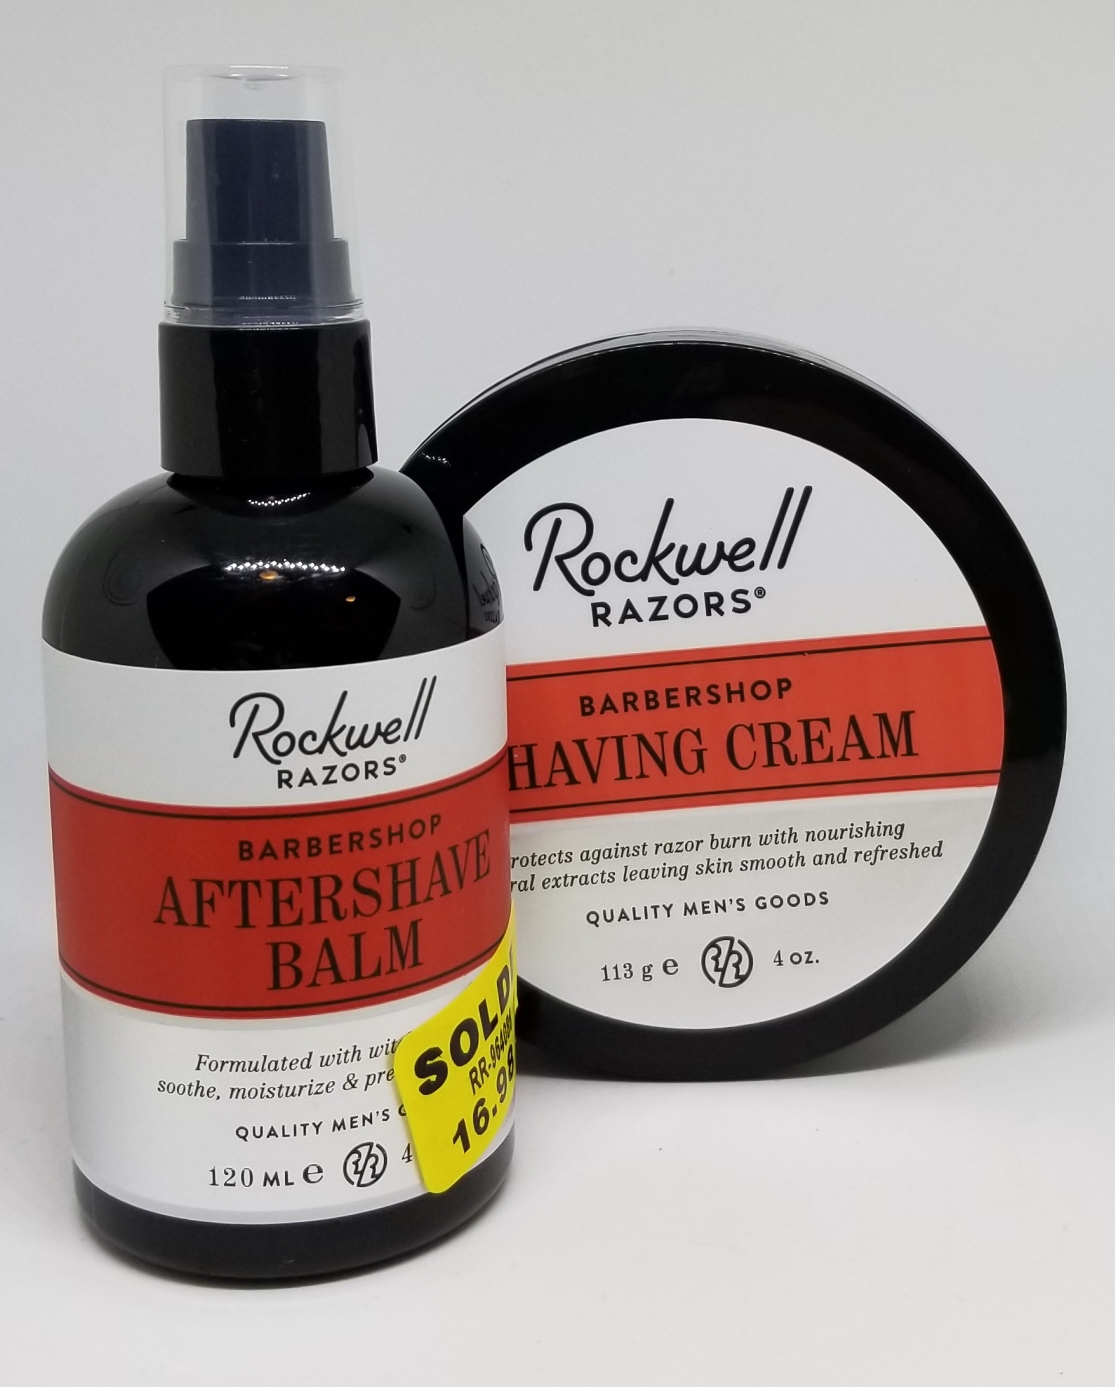 Rockwell Shaving Cream and Aftershave Balm – Rocking my mug so well!